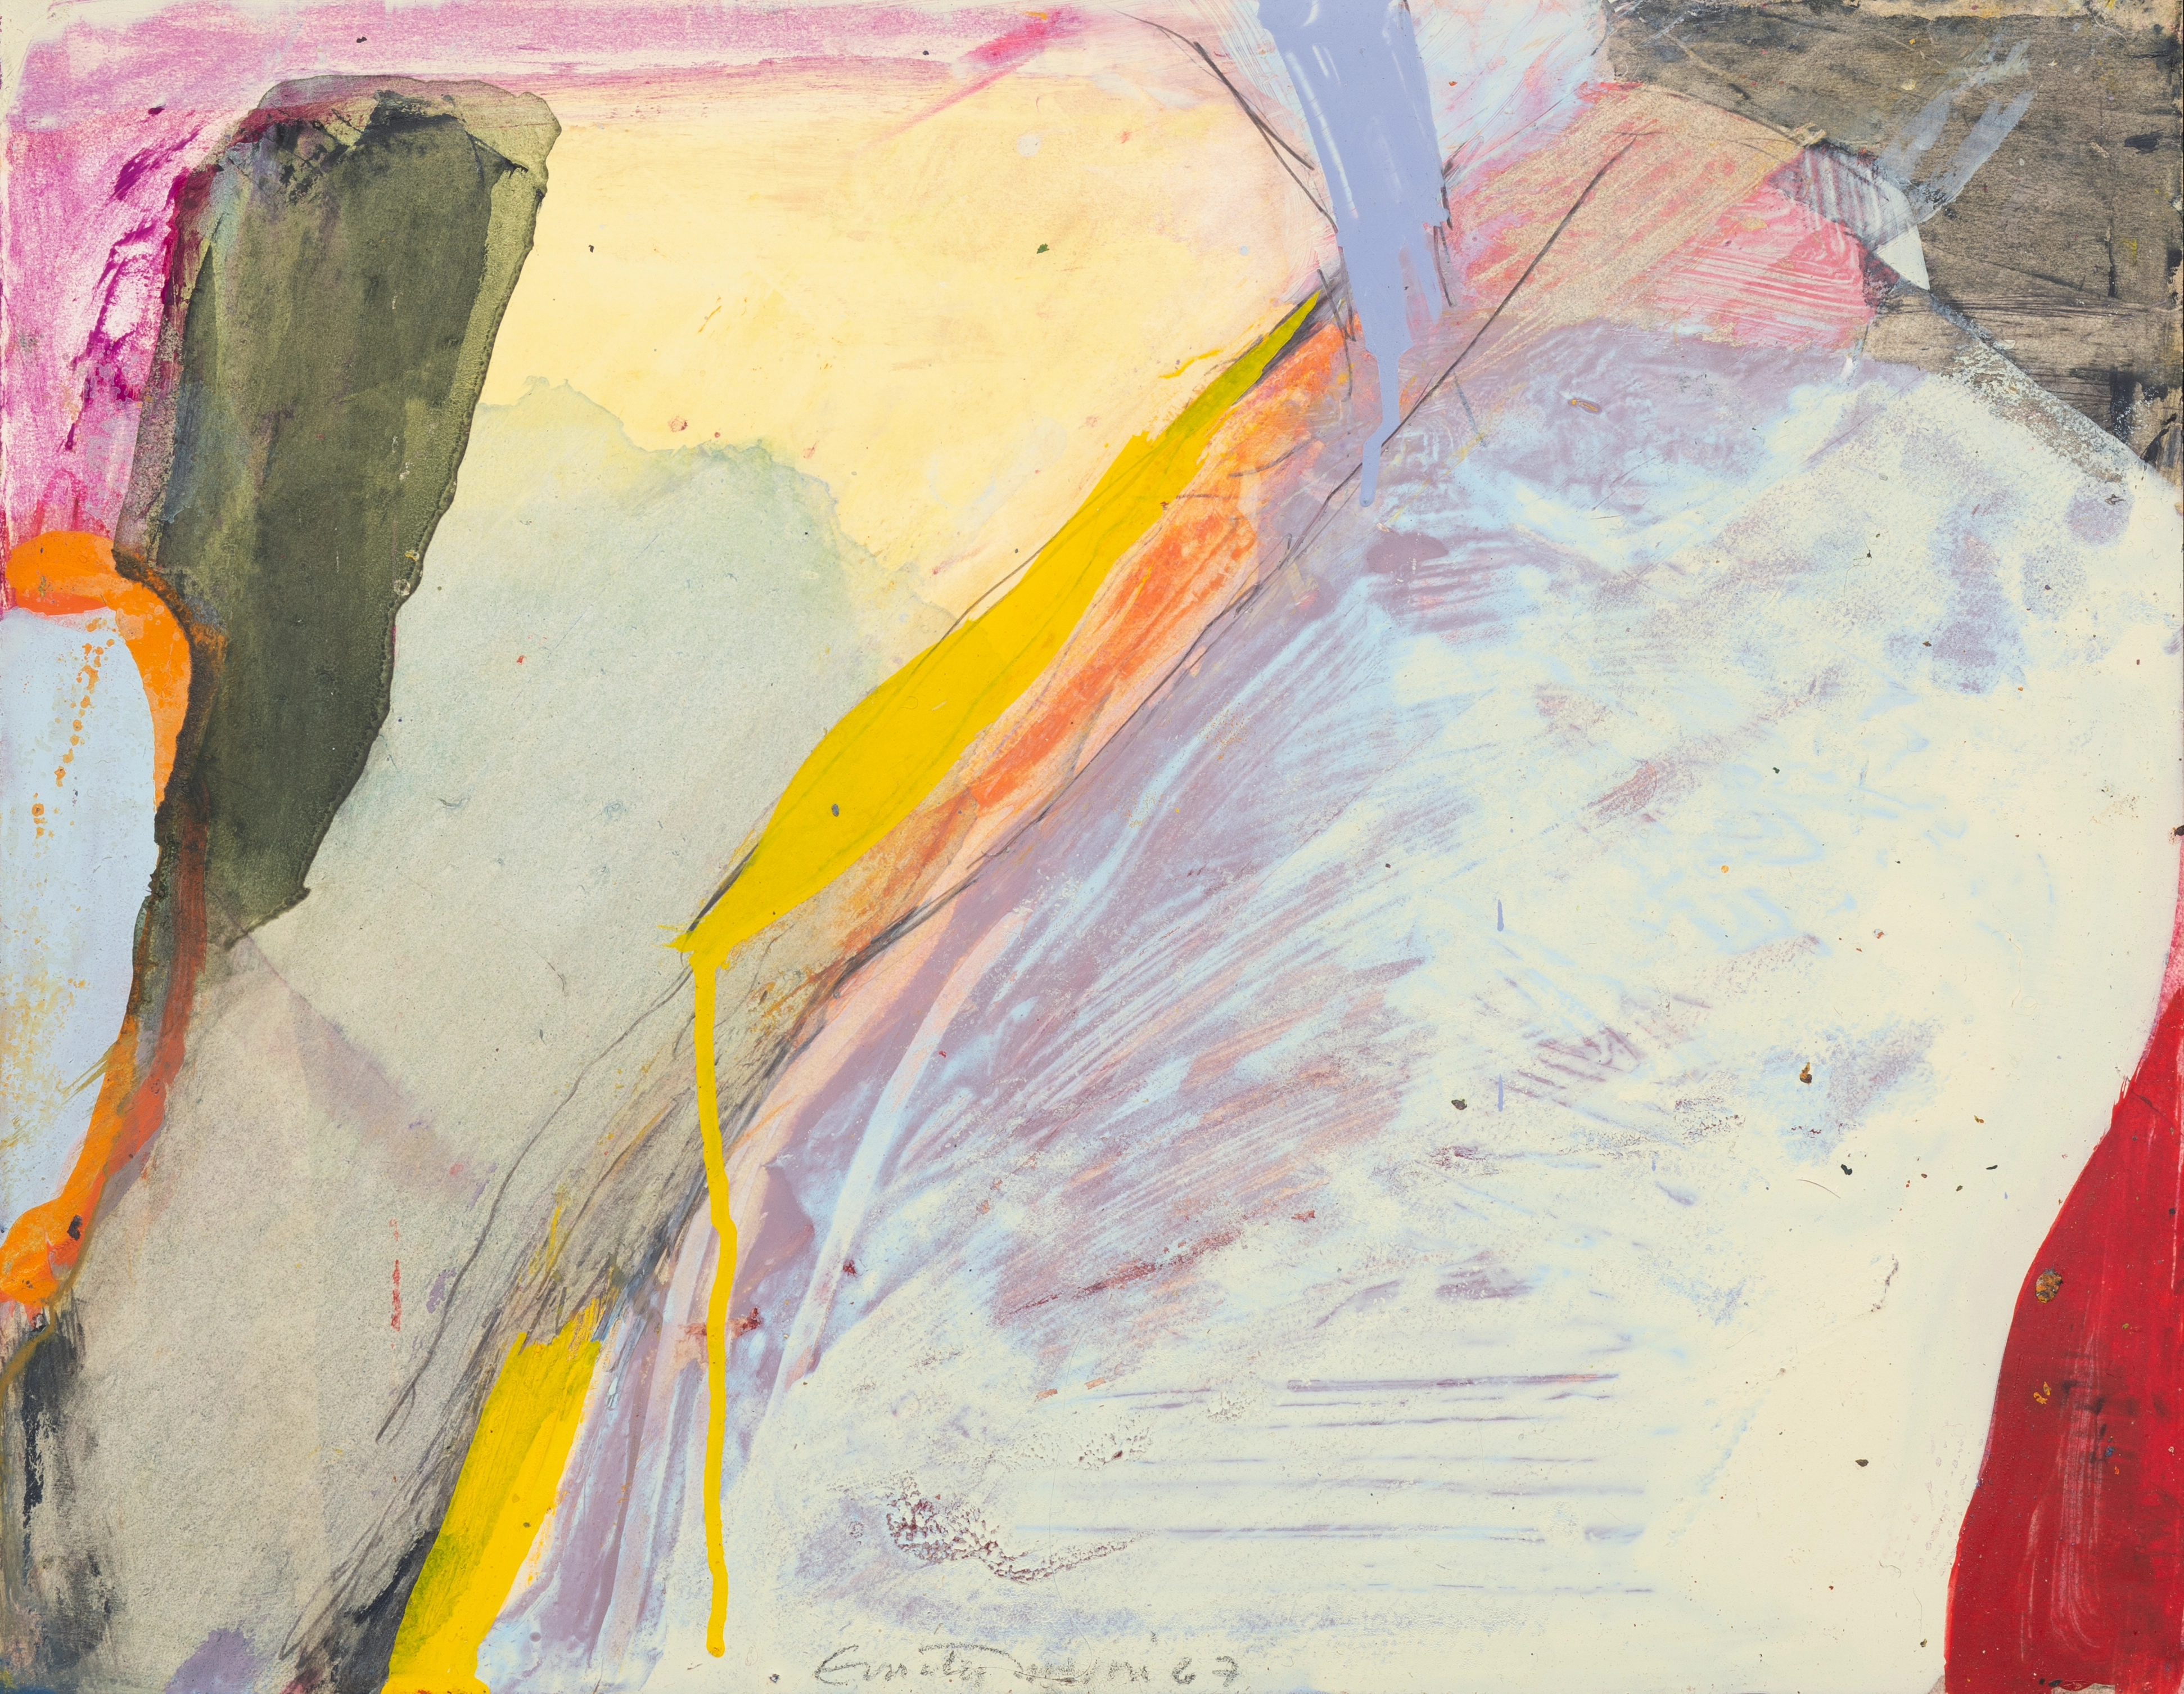 Abstract oil on paper work, comprised of large, translucent, layered forms of light colors. From left to right, there is but, orange, magenta, grey, creams, purples, white, and red.